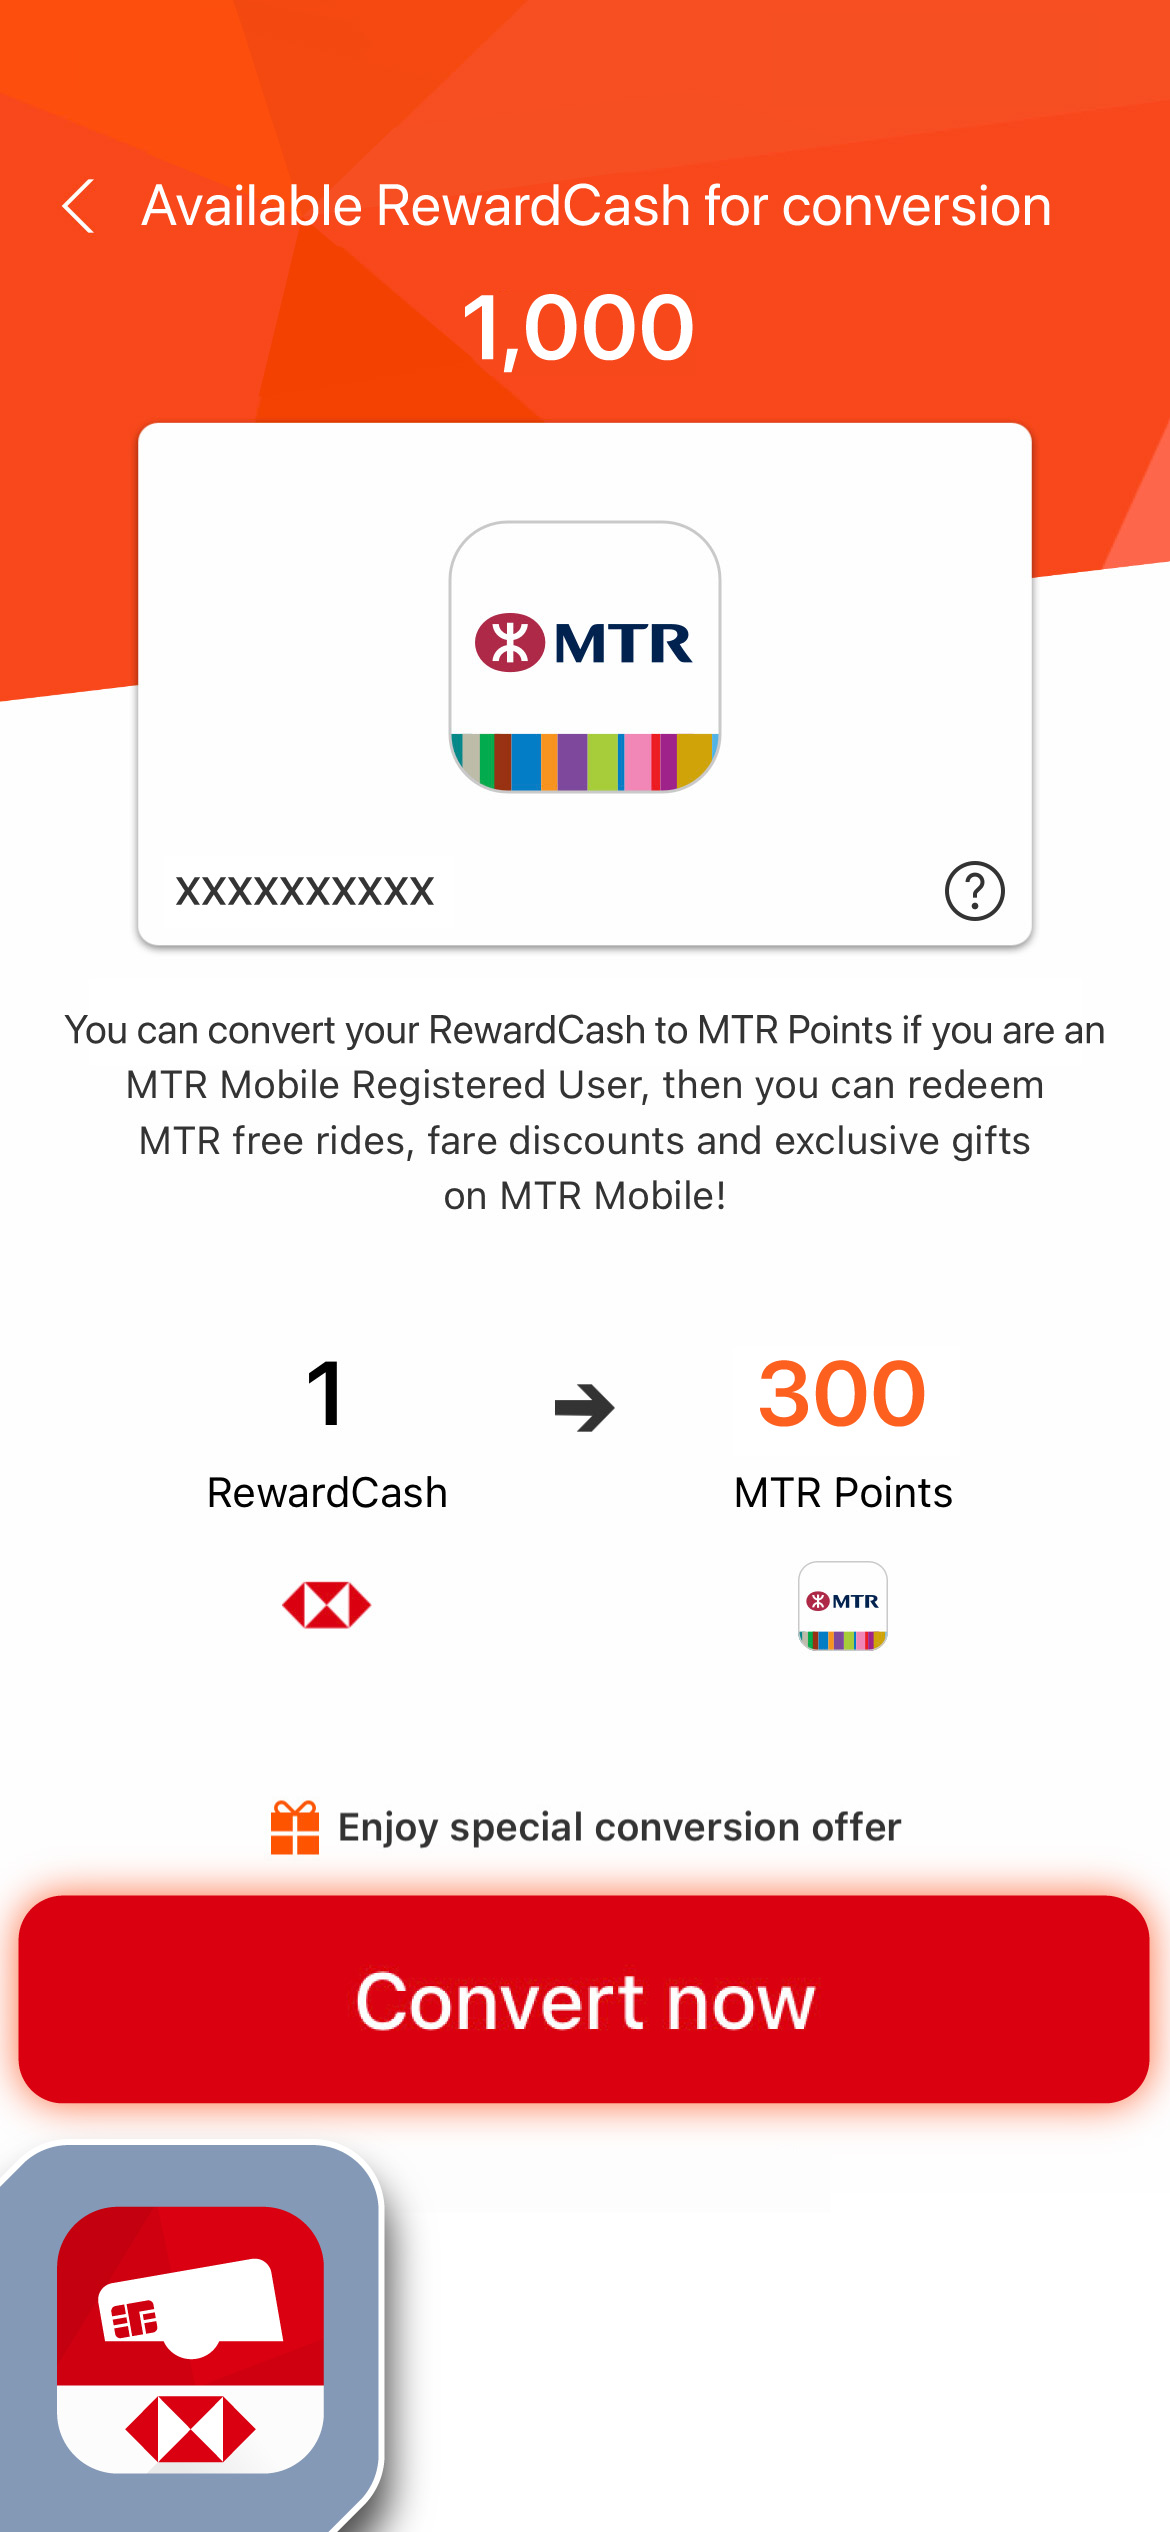 Convert HSBC RewardCash to MTR Points after connecting account successfully